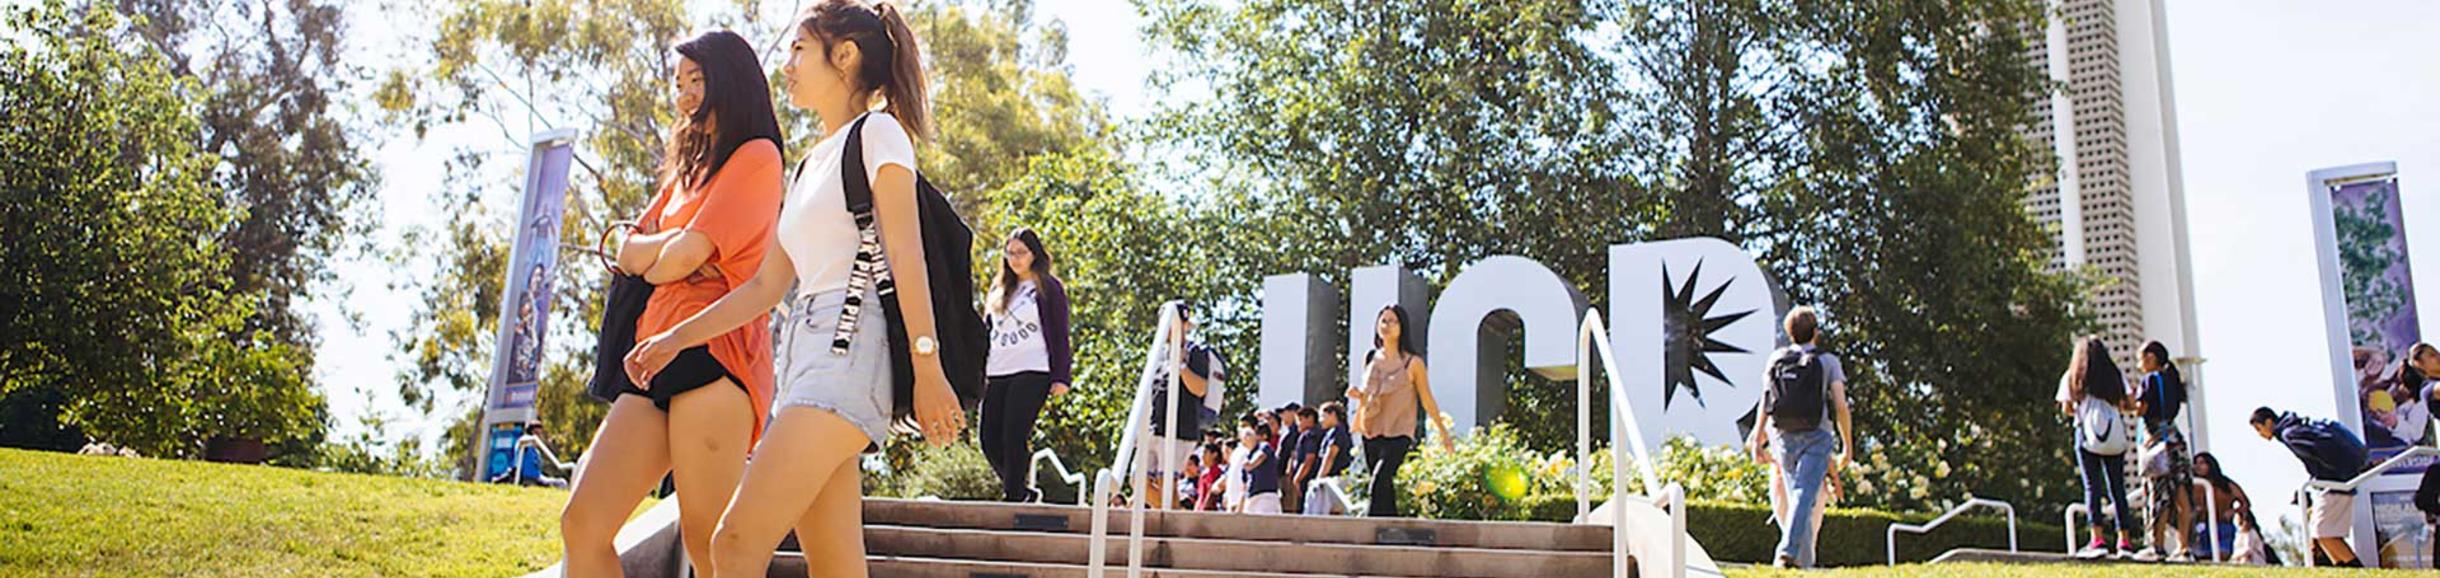 students walking near the UCR sign and Bell Tower